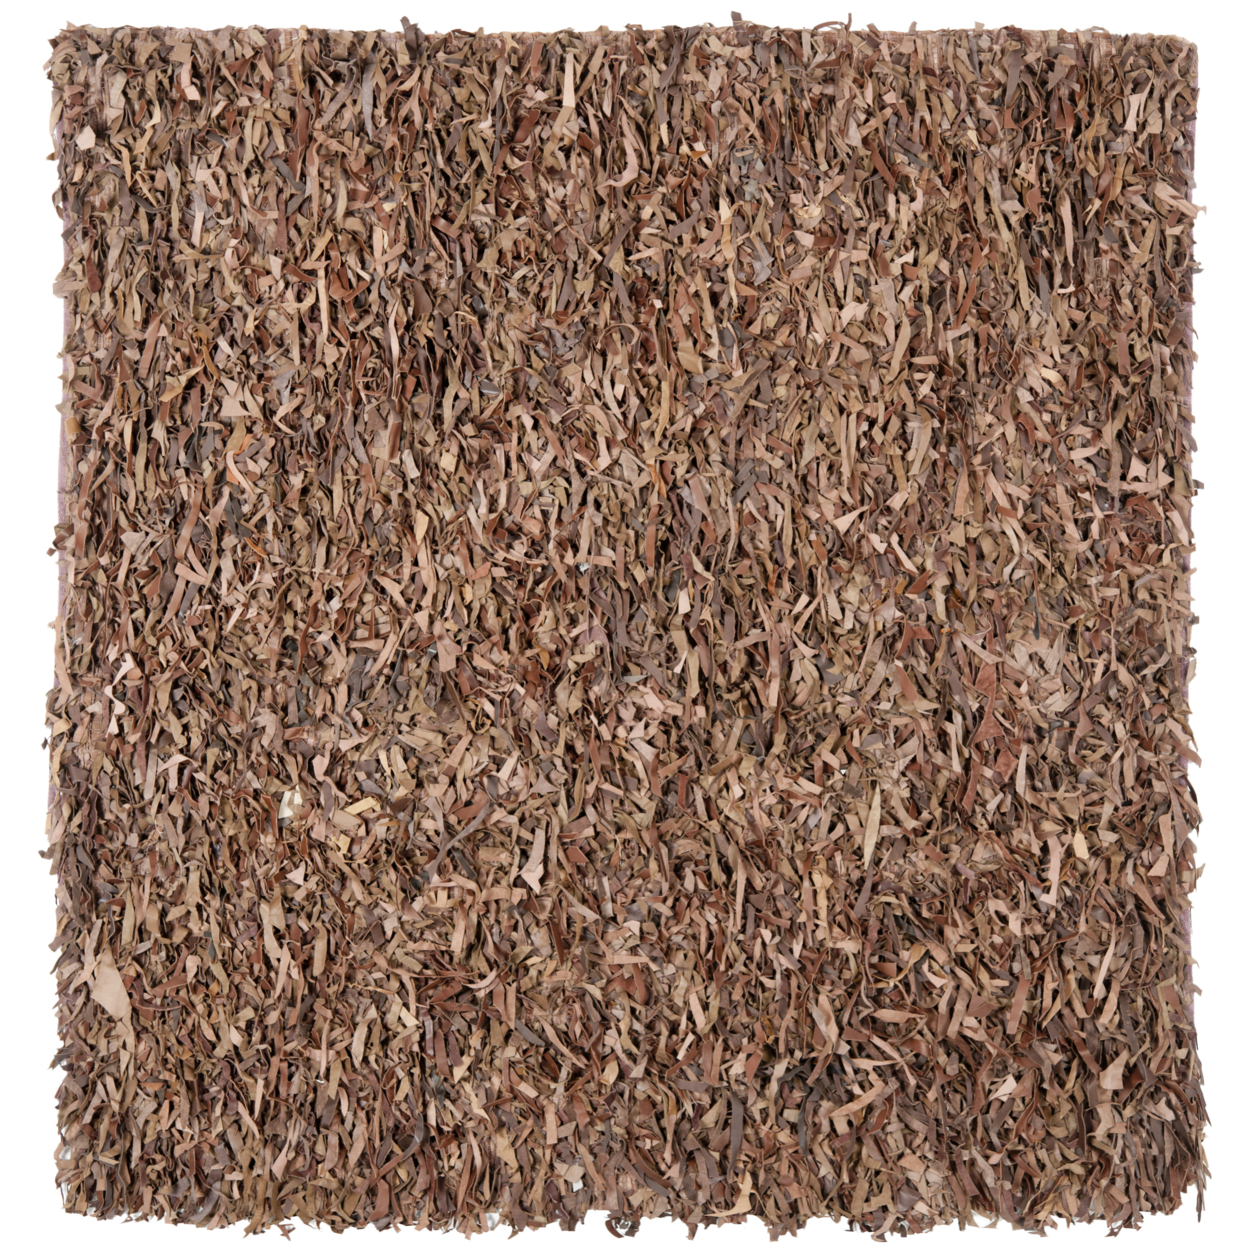 SAFAVIEH Leather Shag LSG511K Hand-knotted Brown Rug - 6' Square